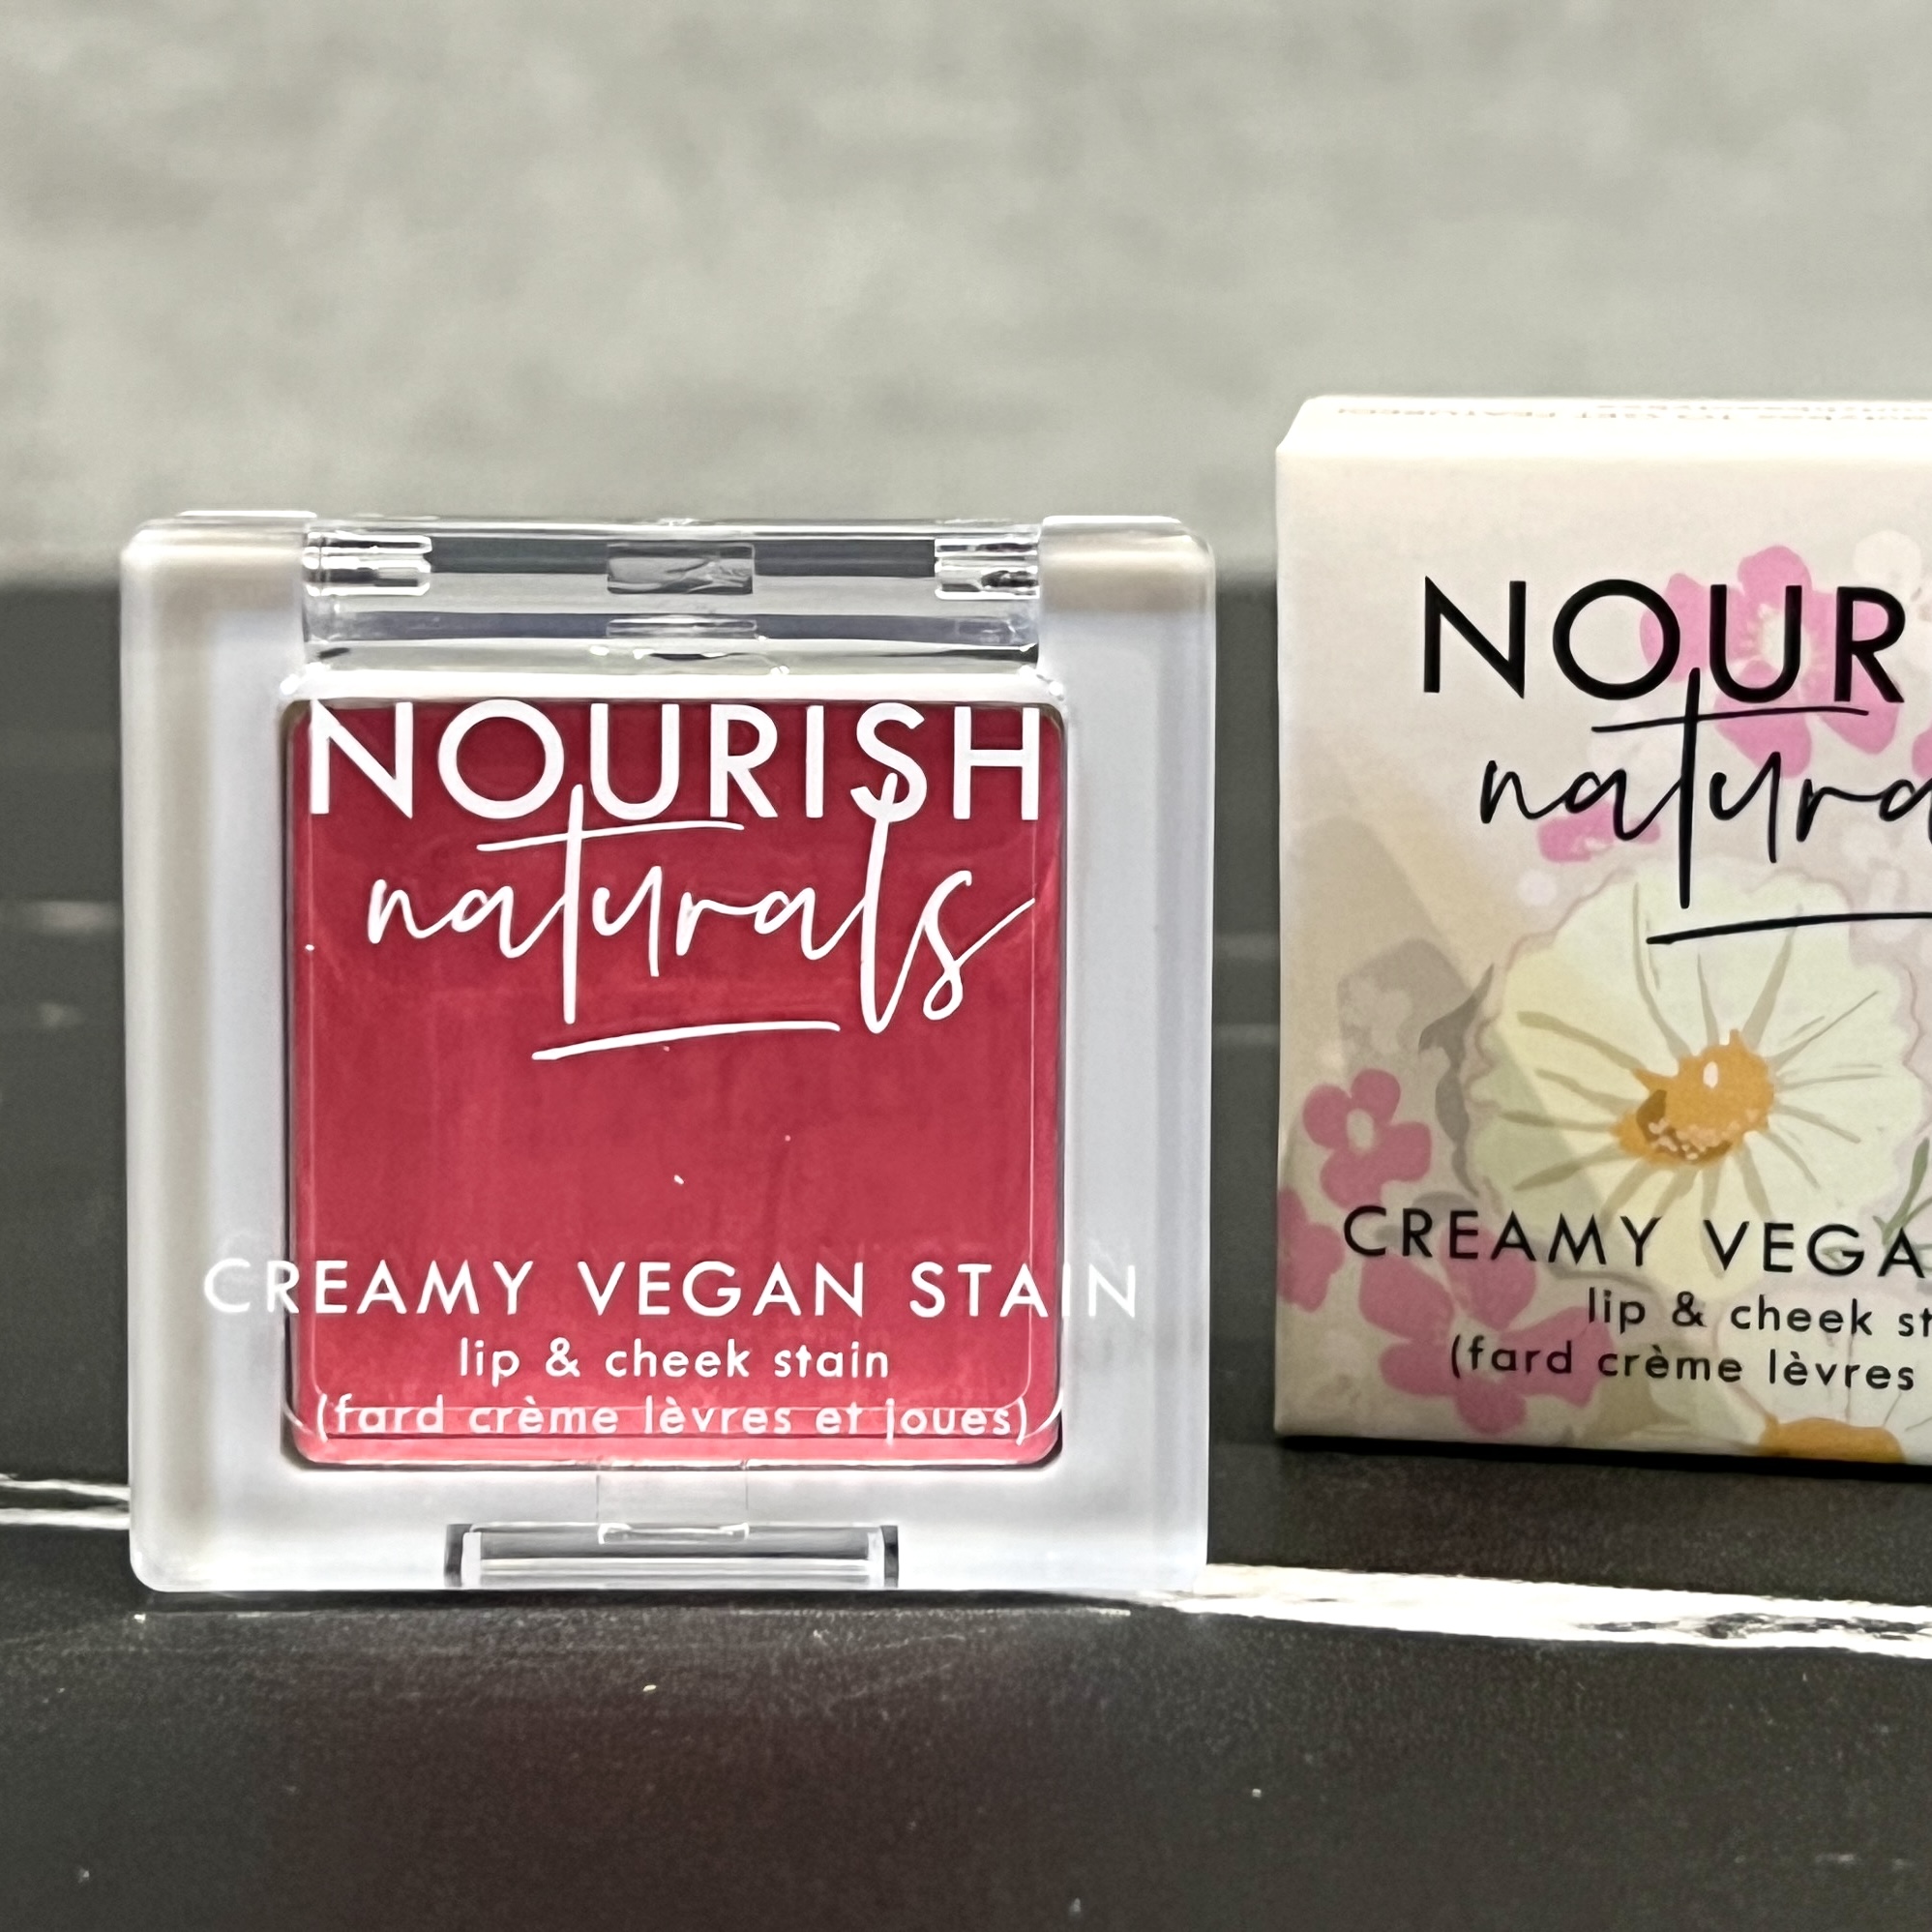 Front of Nourish Naturals Vegan Stain in Pinkelle for Nourish Beauty Box January 2023